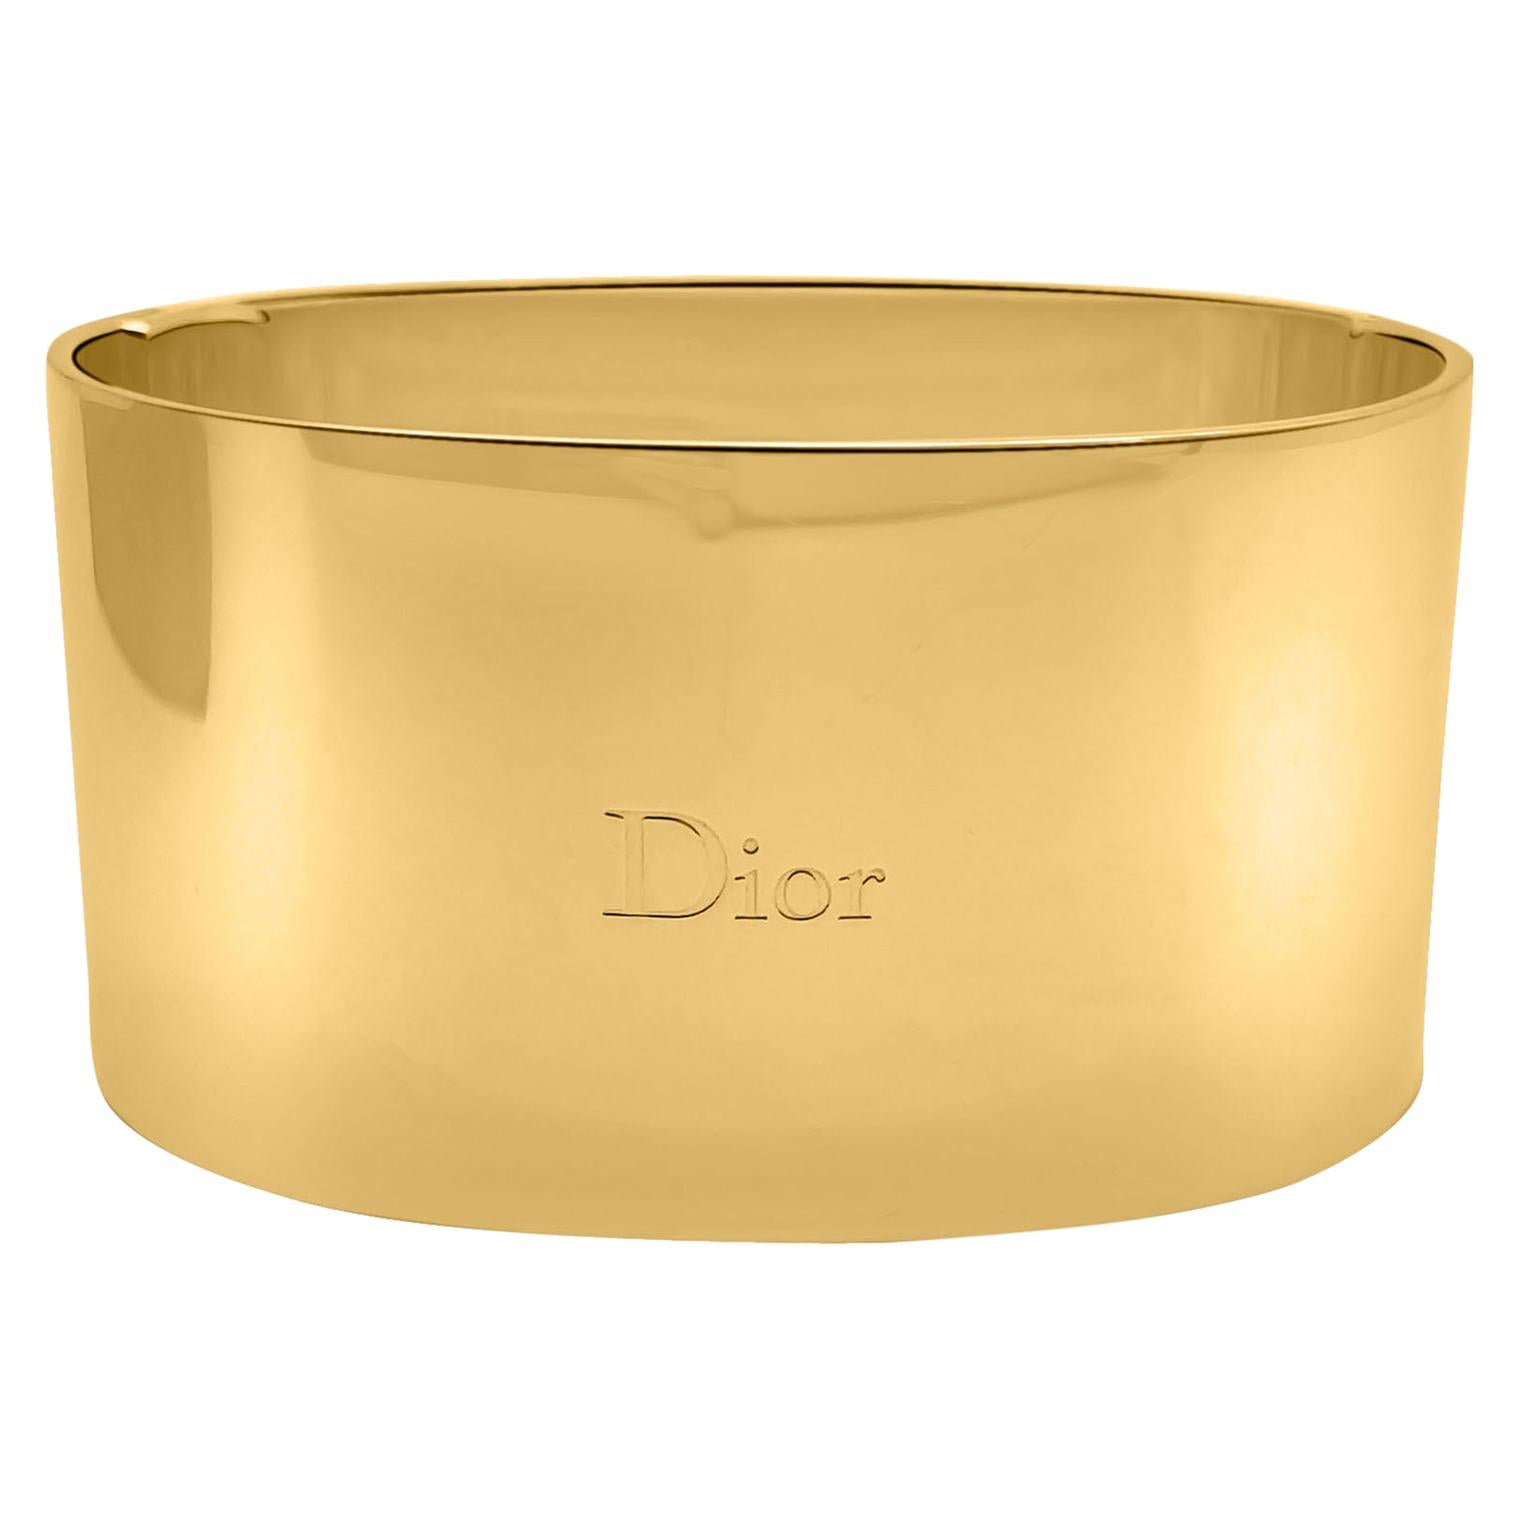 An dramatic and especially striking Vintage Dior Two Tone Blush Cuff. Featuring contrasting highly shine gold plated metal on one side and the most gorgeous blush pink enamel on the other. Embossed Dior on the front and also the inside for extra